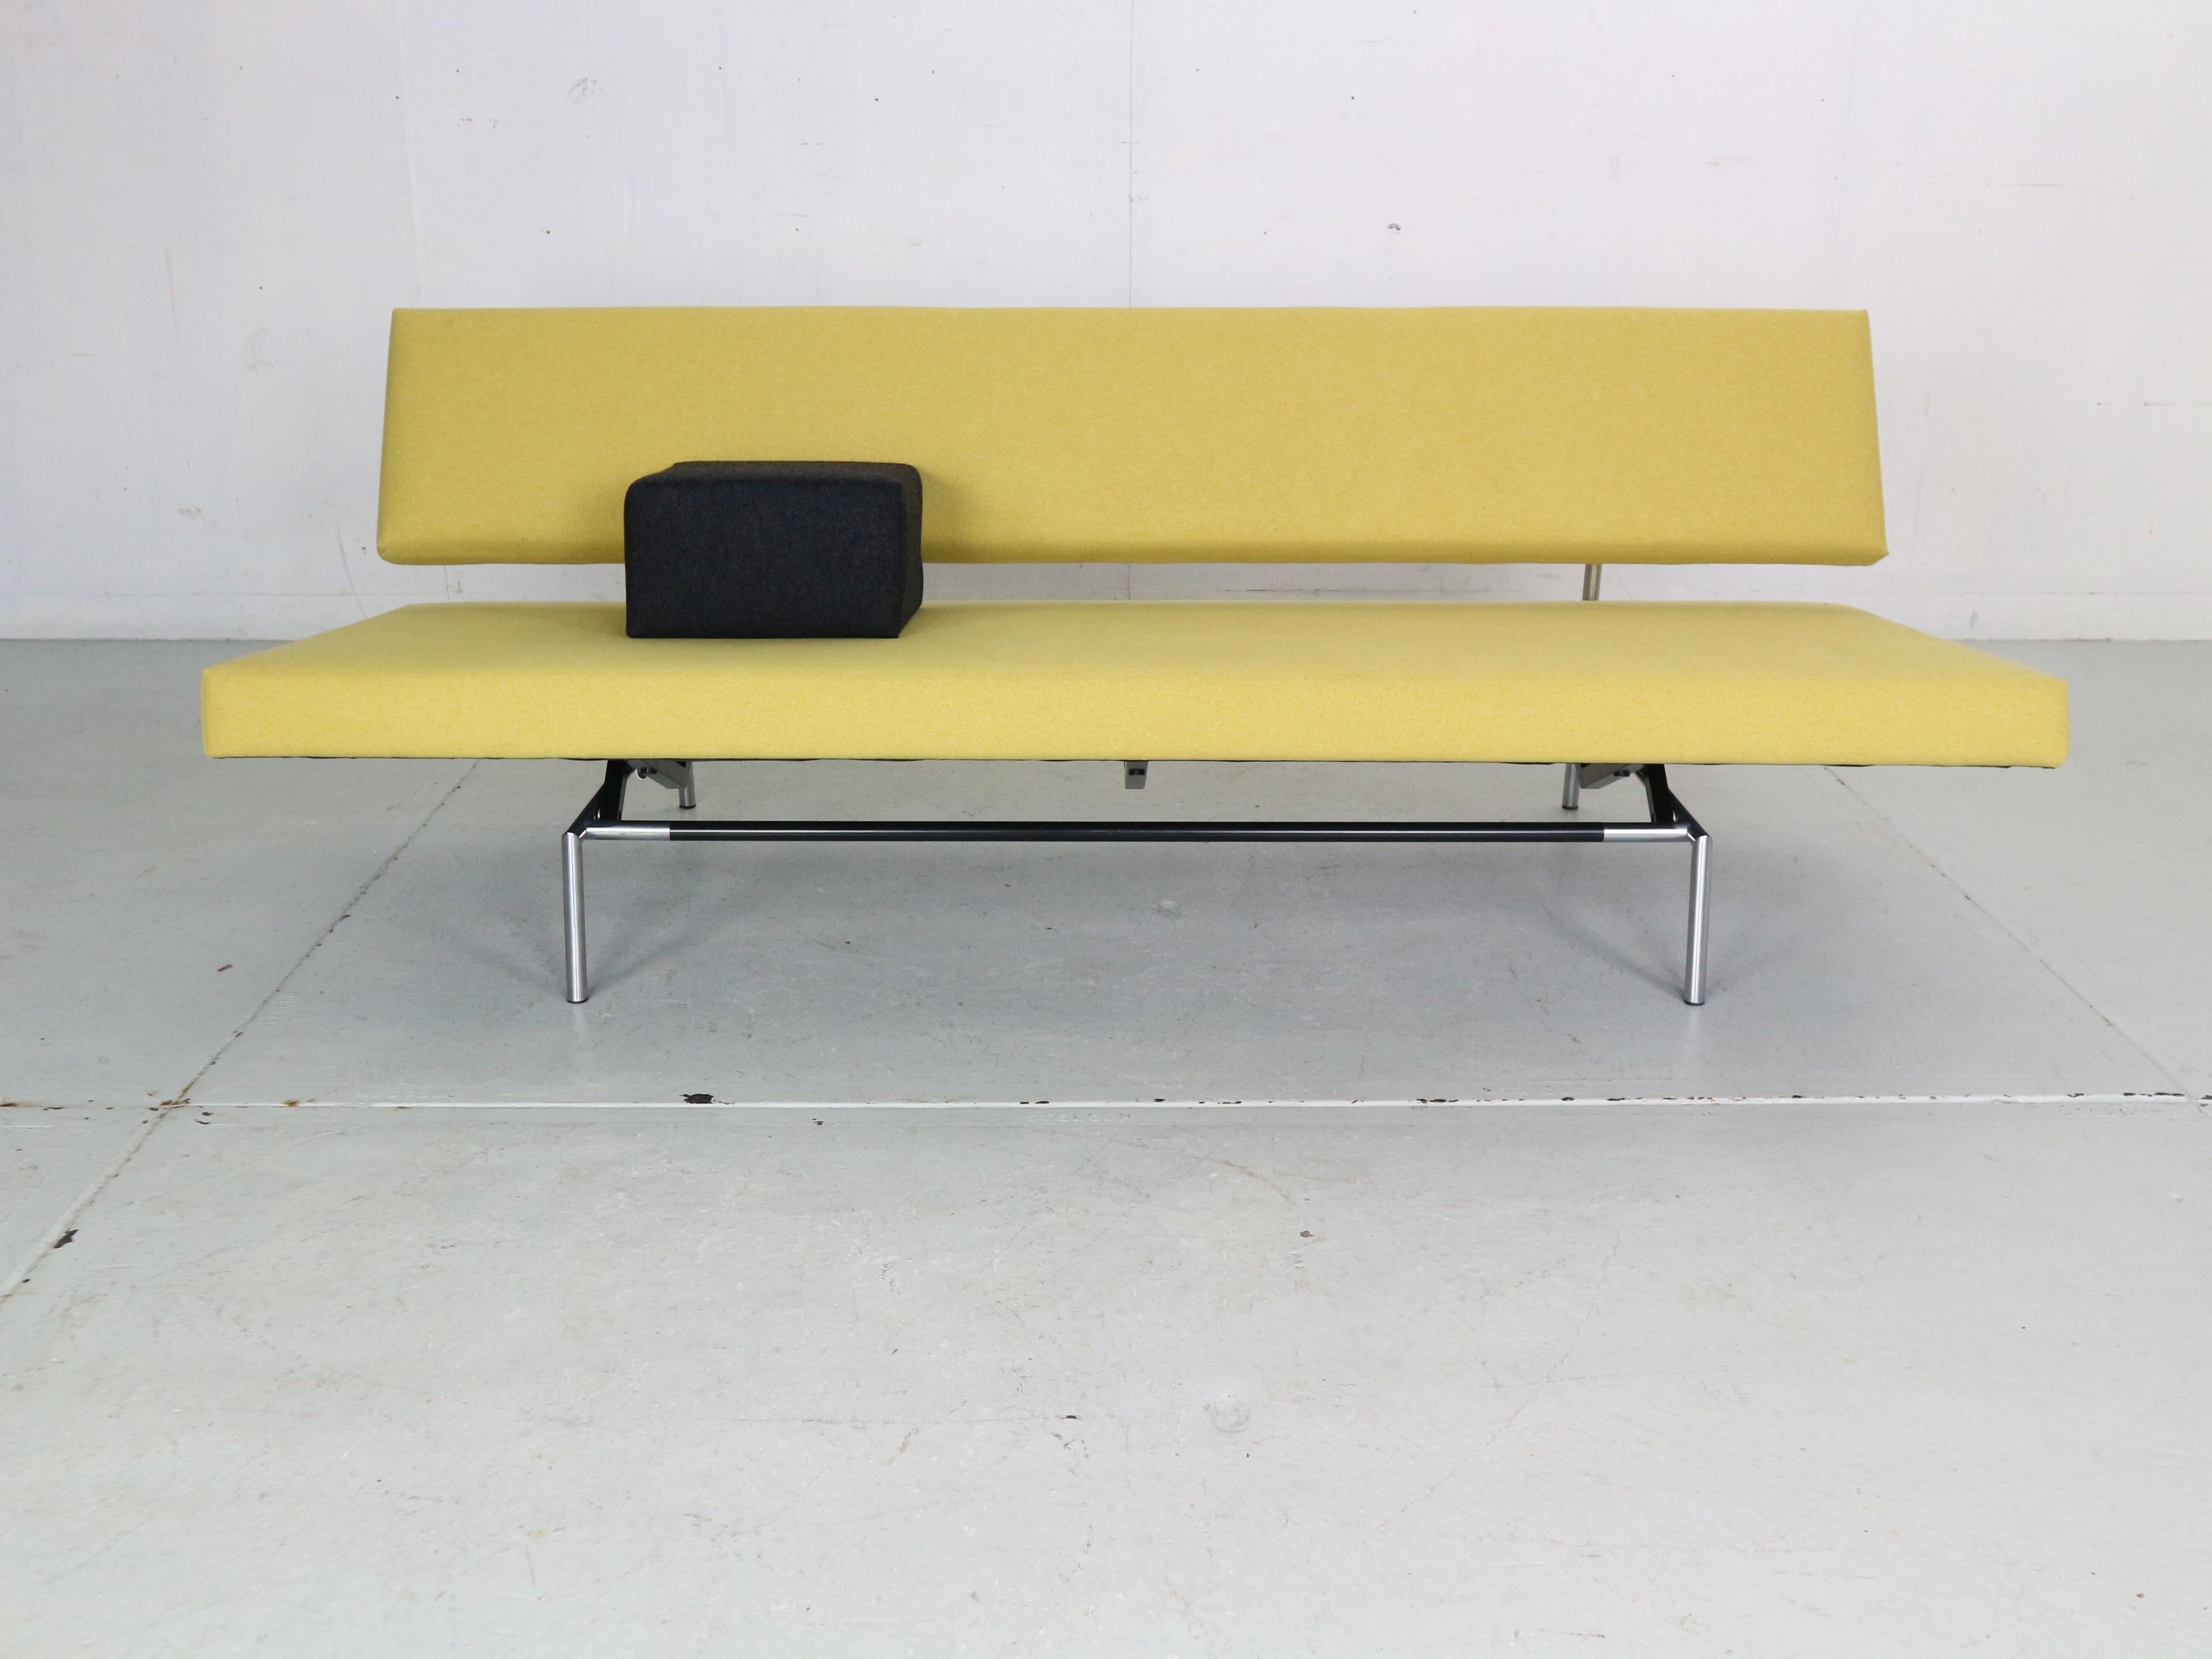 Minimalistic and timeless iconic Dutch design sofa designed by Martin Visser for t'Spectrum manufacture in 1960s period, Netherlands.
Model number- BZ53.
Original chrome and black lacquered metal frame with newly upholstered in yellow colour